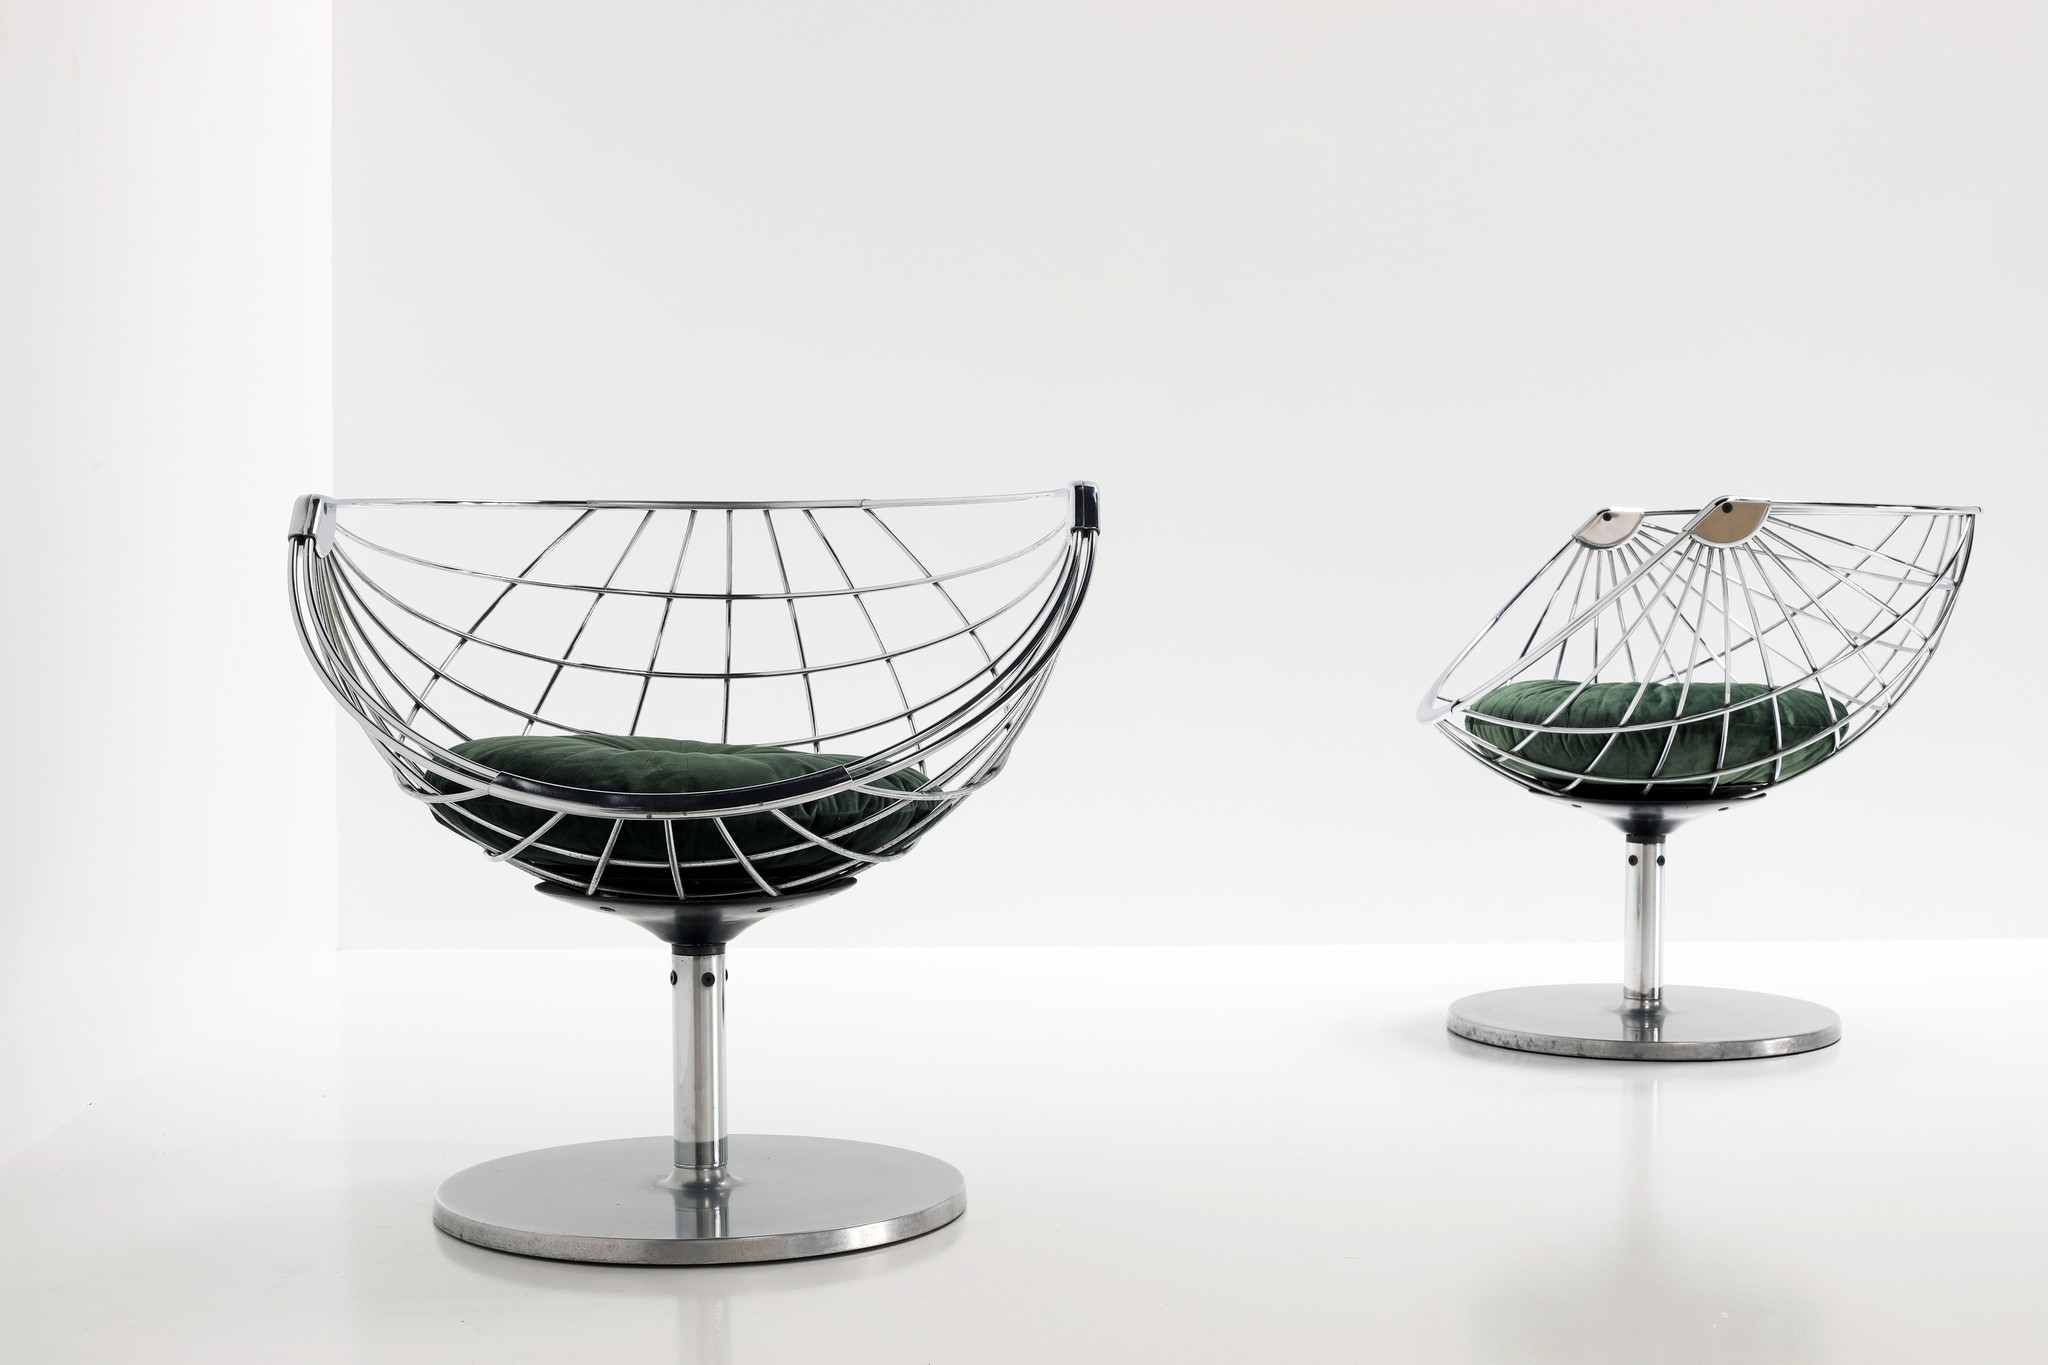 Atomic Ball Chairs by Rudi Verelst for Novalux, 1974